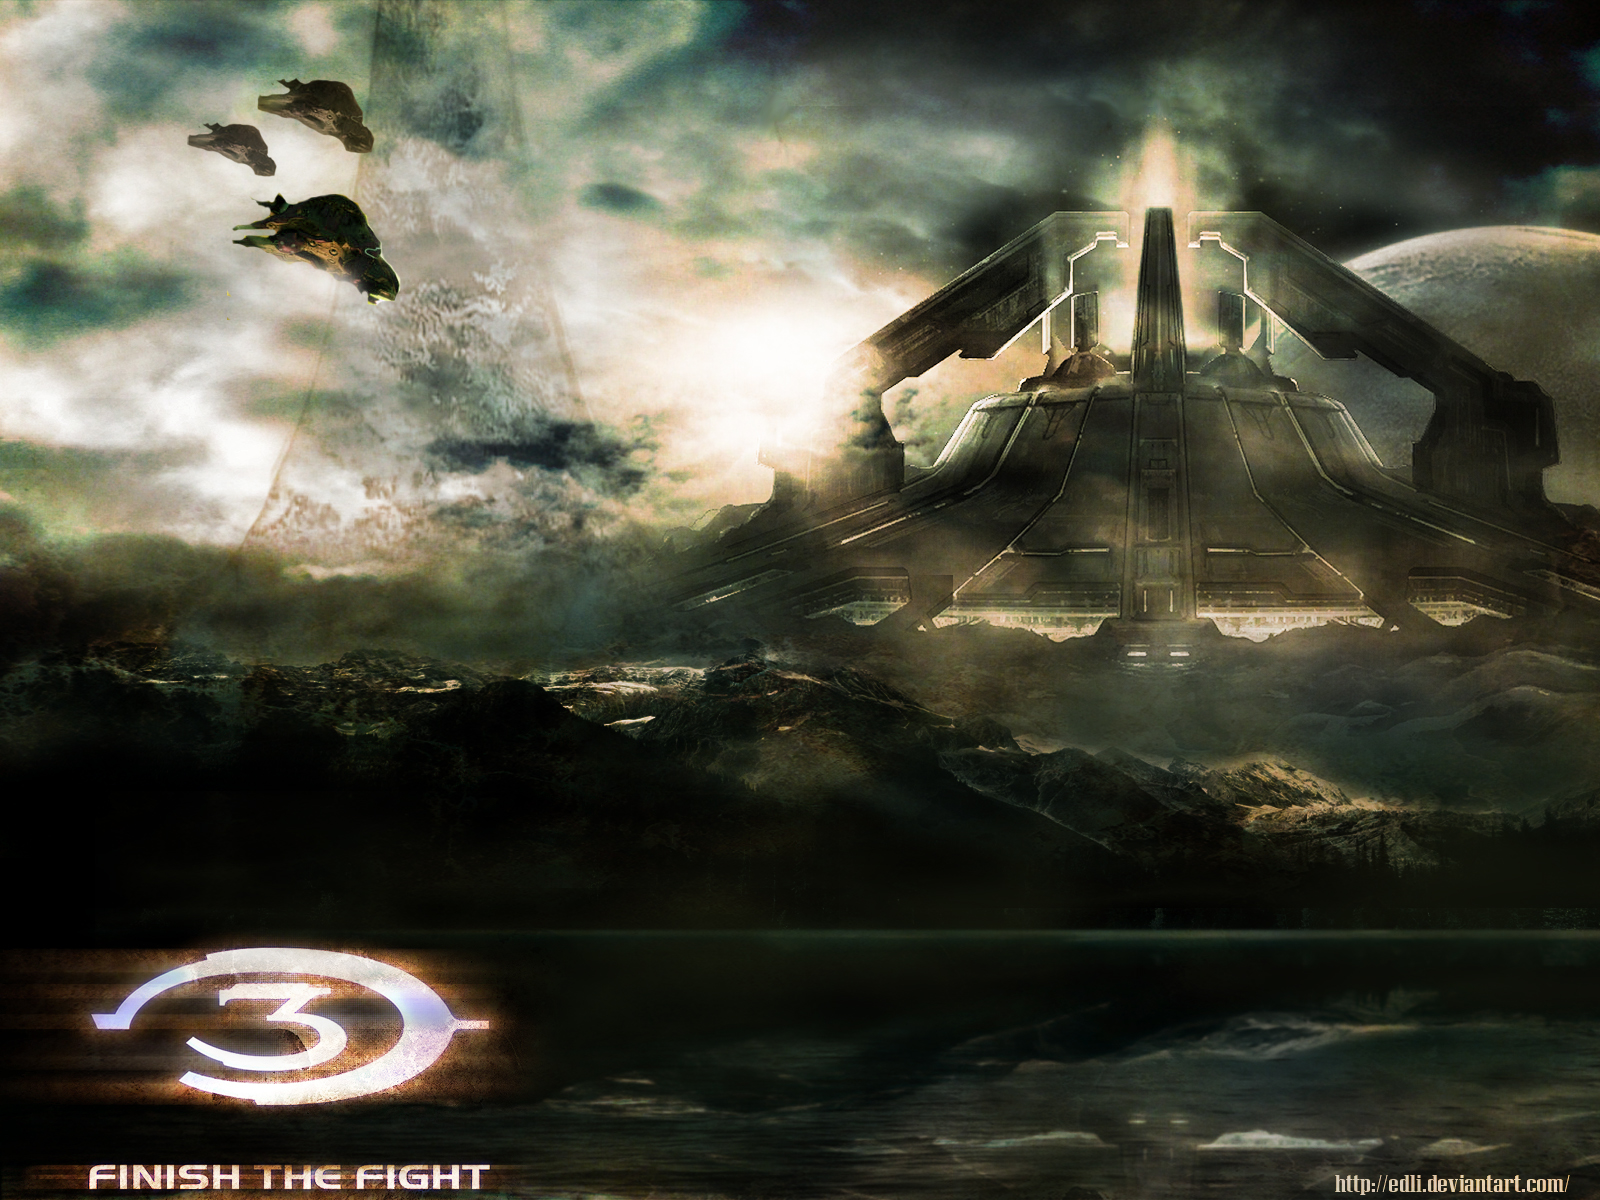 The Widescreen Desktop Wallpaper Of Halo Scenes Made By Fans